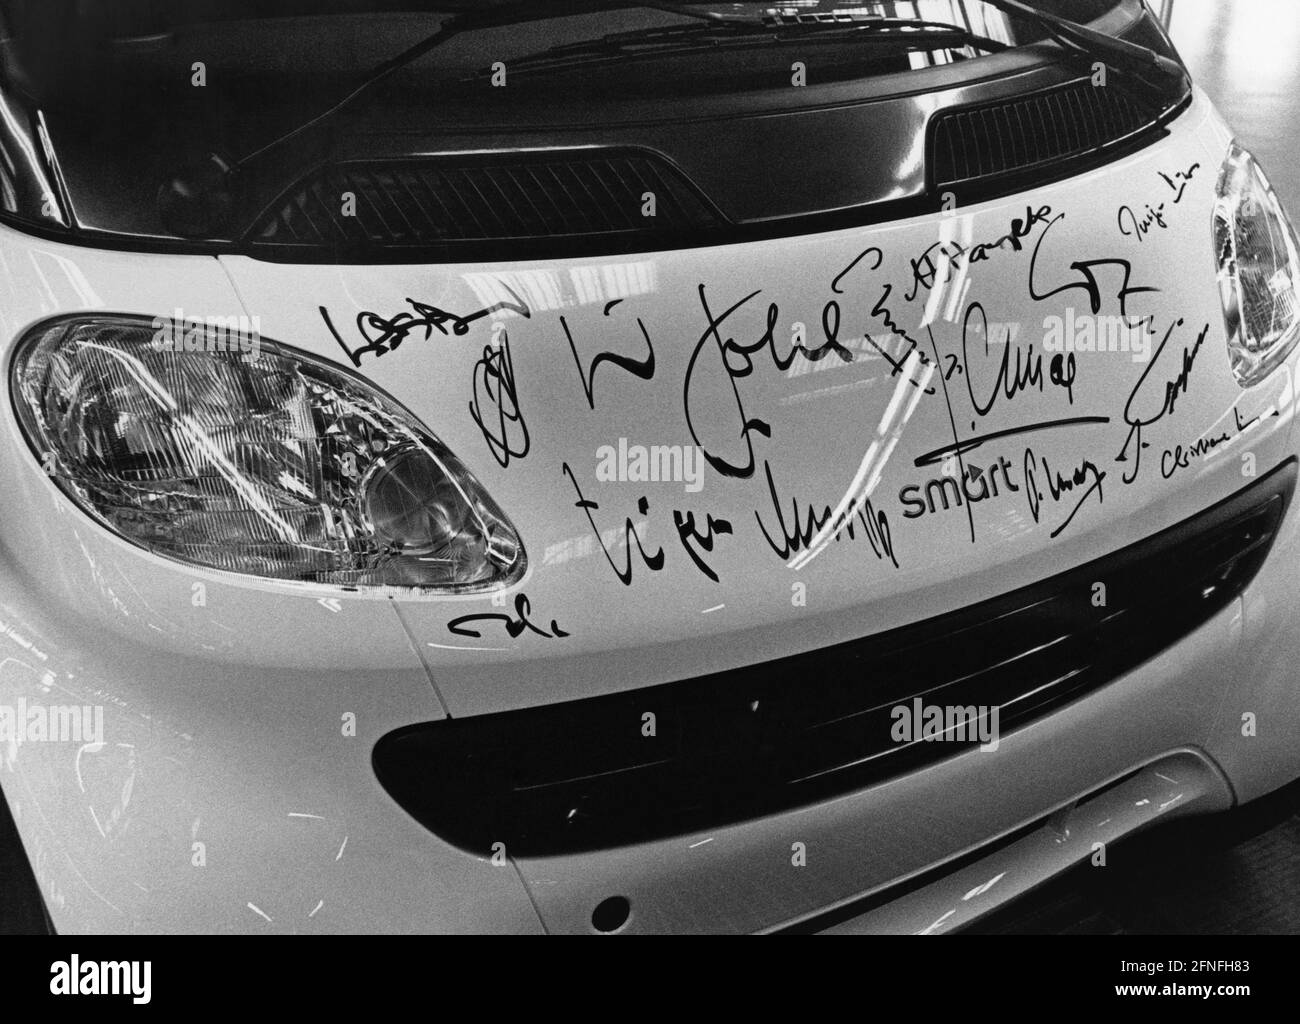 The bonnet of the first Smart fortwo, bearing the signatures of Helmut Kohl and Jacques Chirac, among others, at the Smart factory in Hambach, the so-called Smartville. [automated translation] Stock Photo